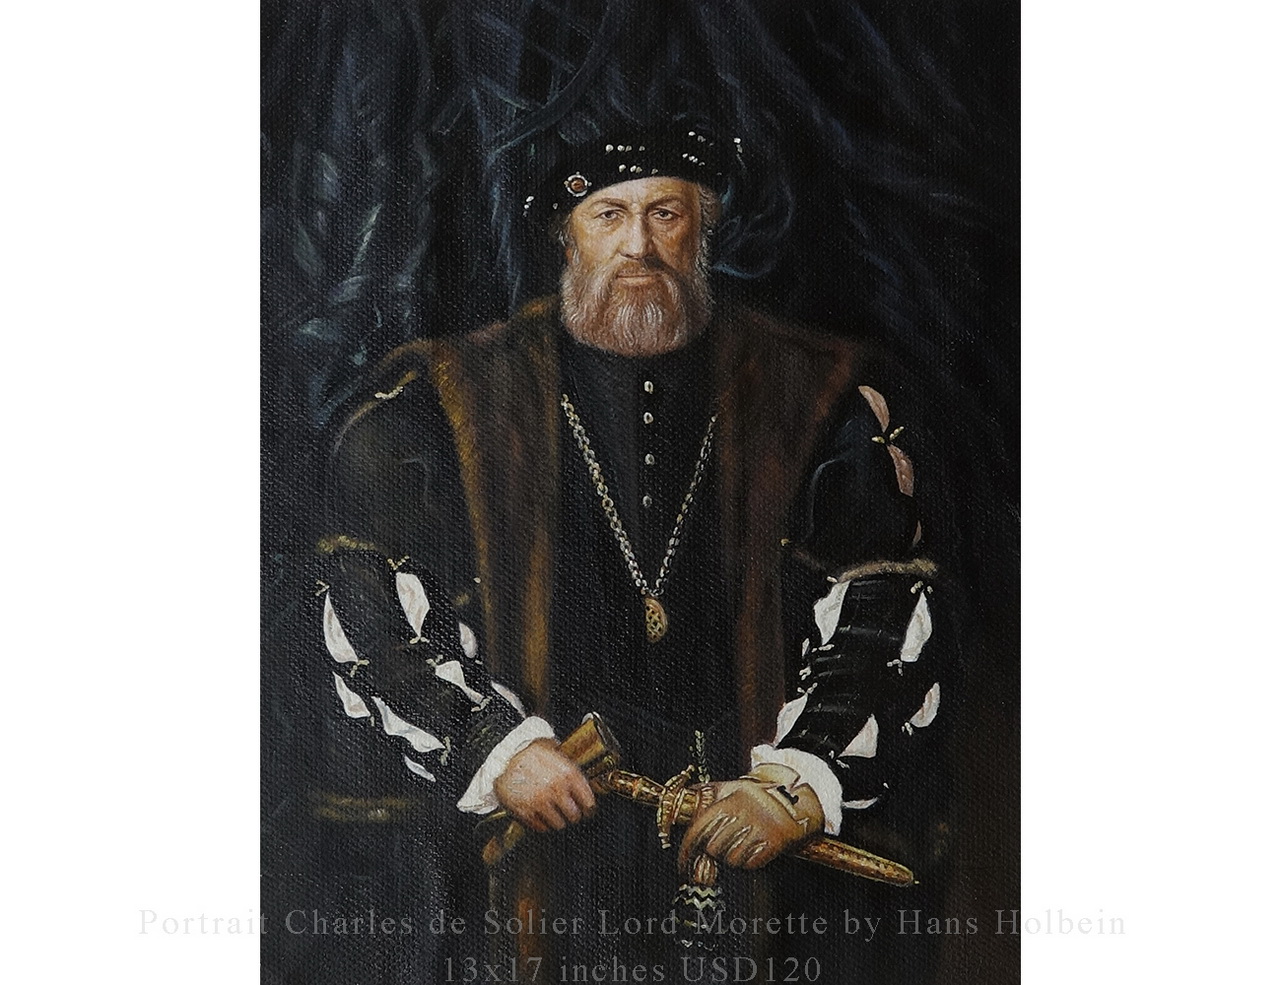 Portrait Charles de Solier Lord Morette by Hans Holbein 13x17 inches USD49 Oil Paintings